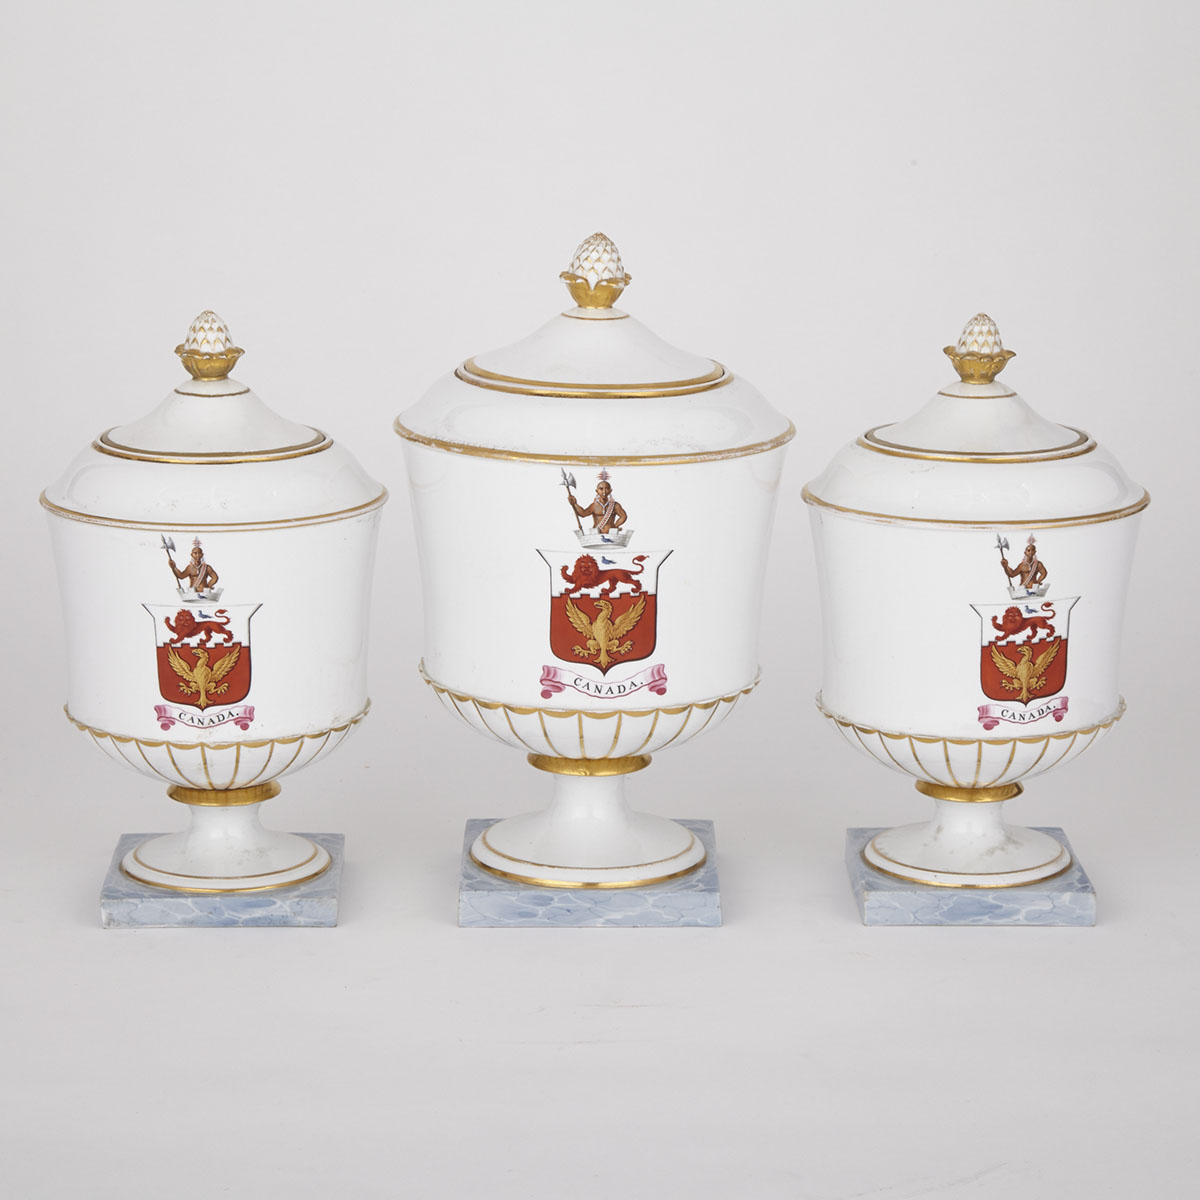 Garniture of Three Chamberlains Worcester Sir Isaac Brock (1769-1812) Armorial Vases and Covers, c.1813-20